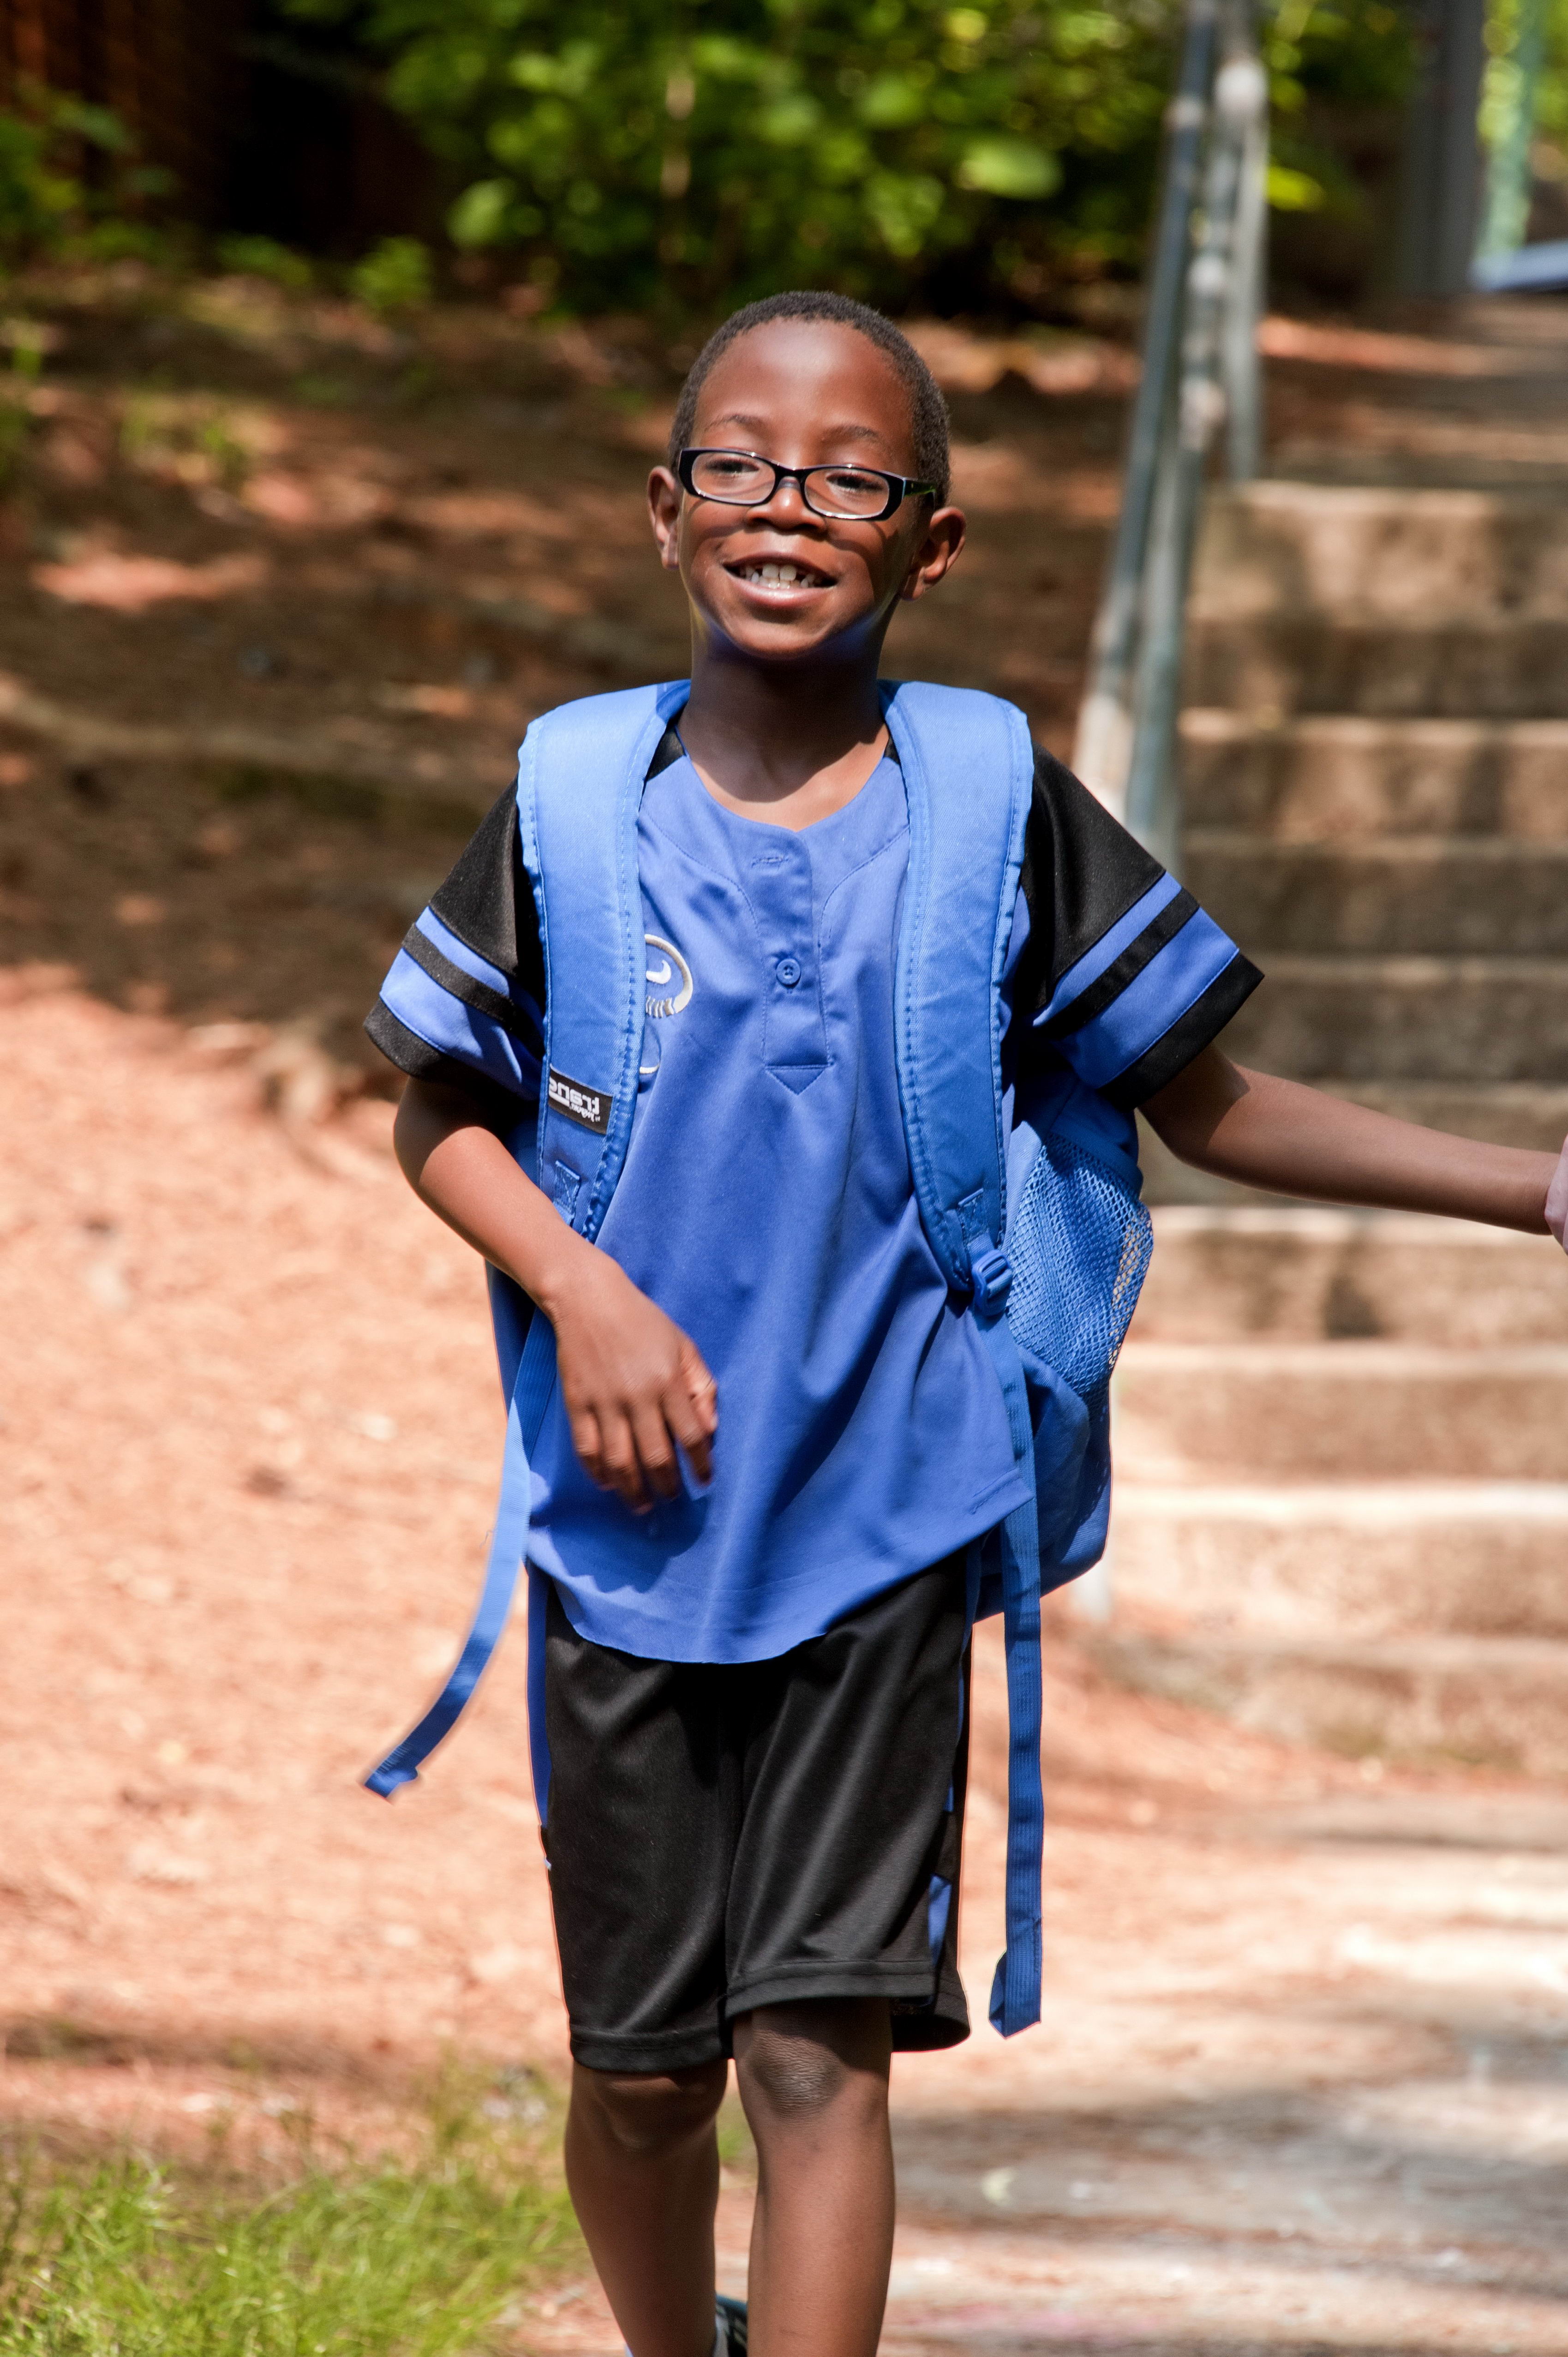 Free picture: young, African American, school boy, walking